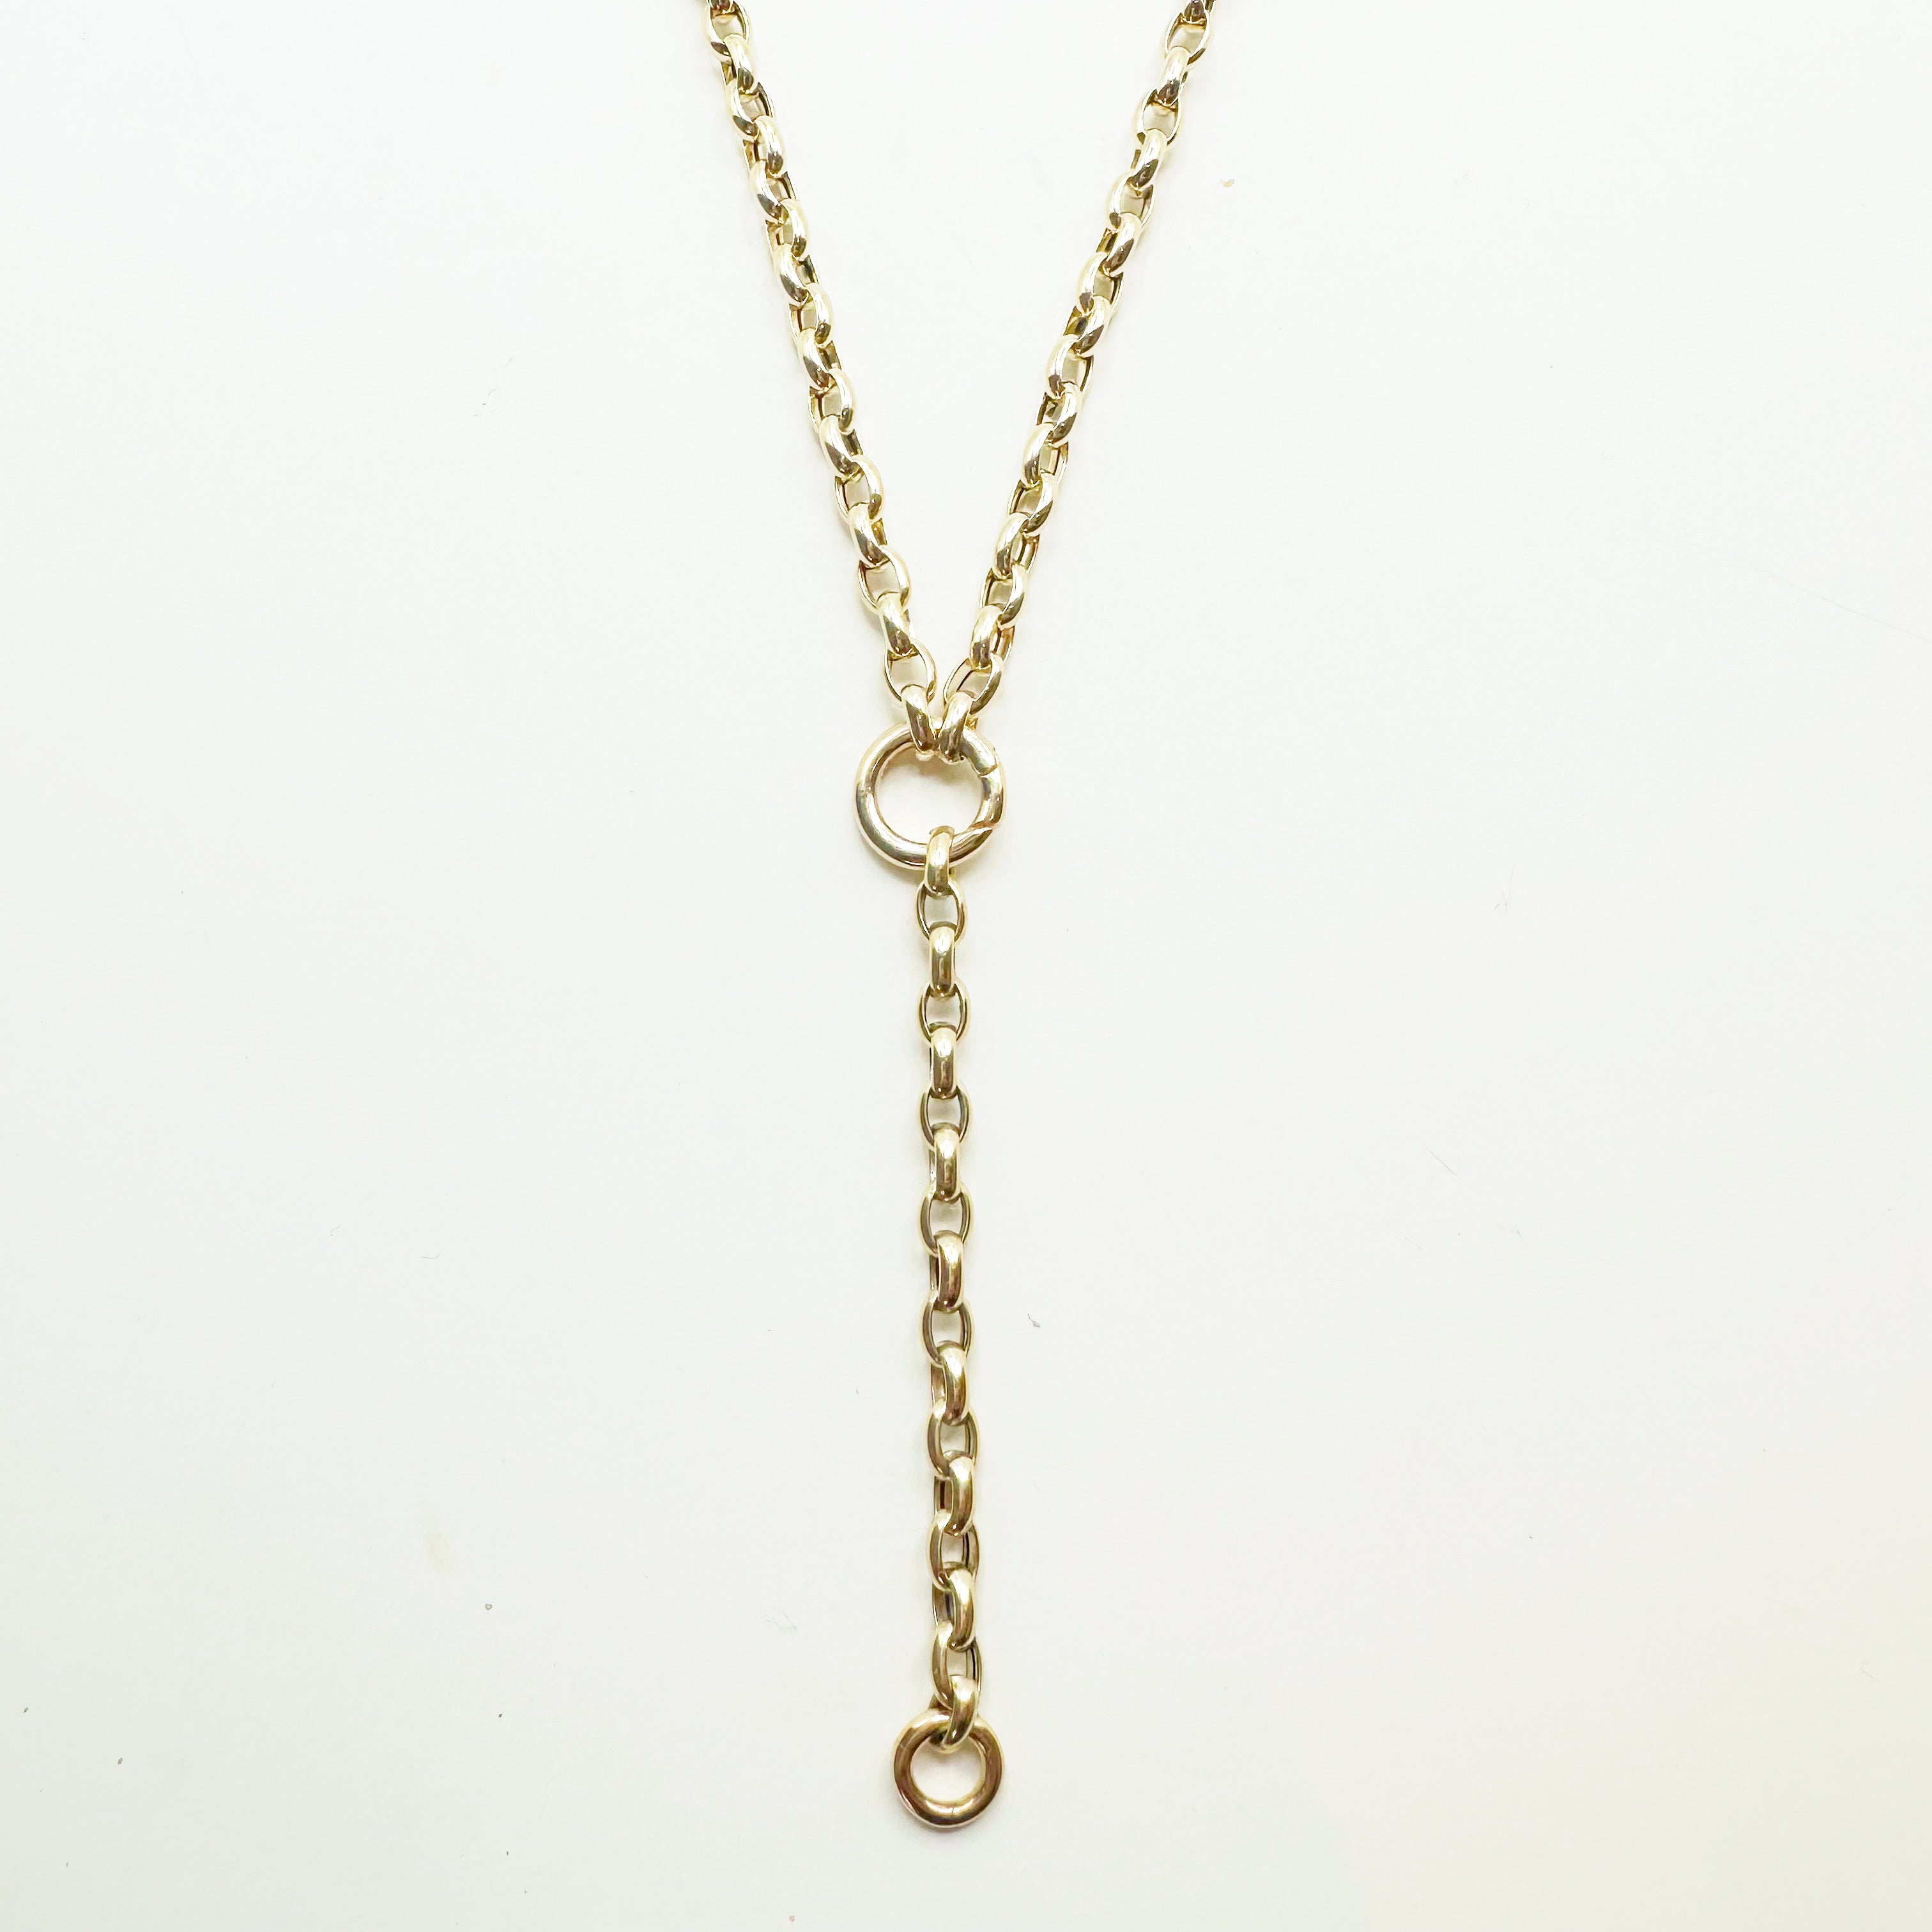 14K GOLD CHAIN NECKLACE WITH CHARM HOLDERS